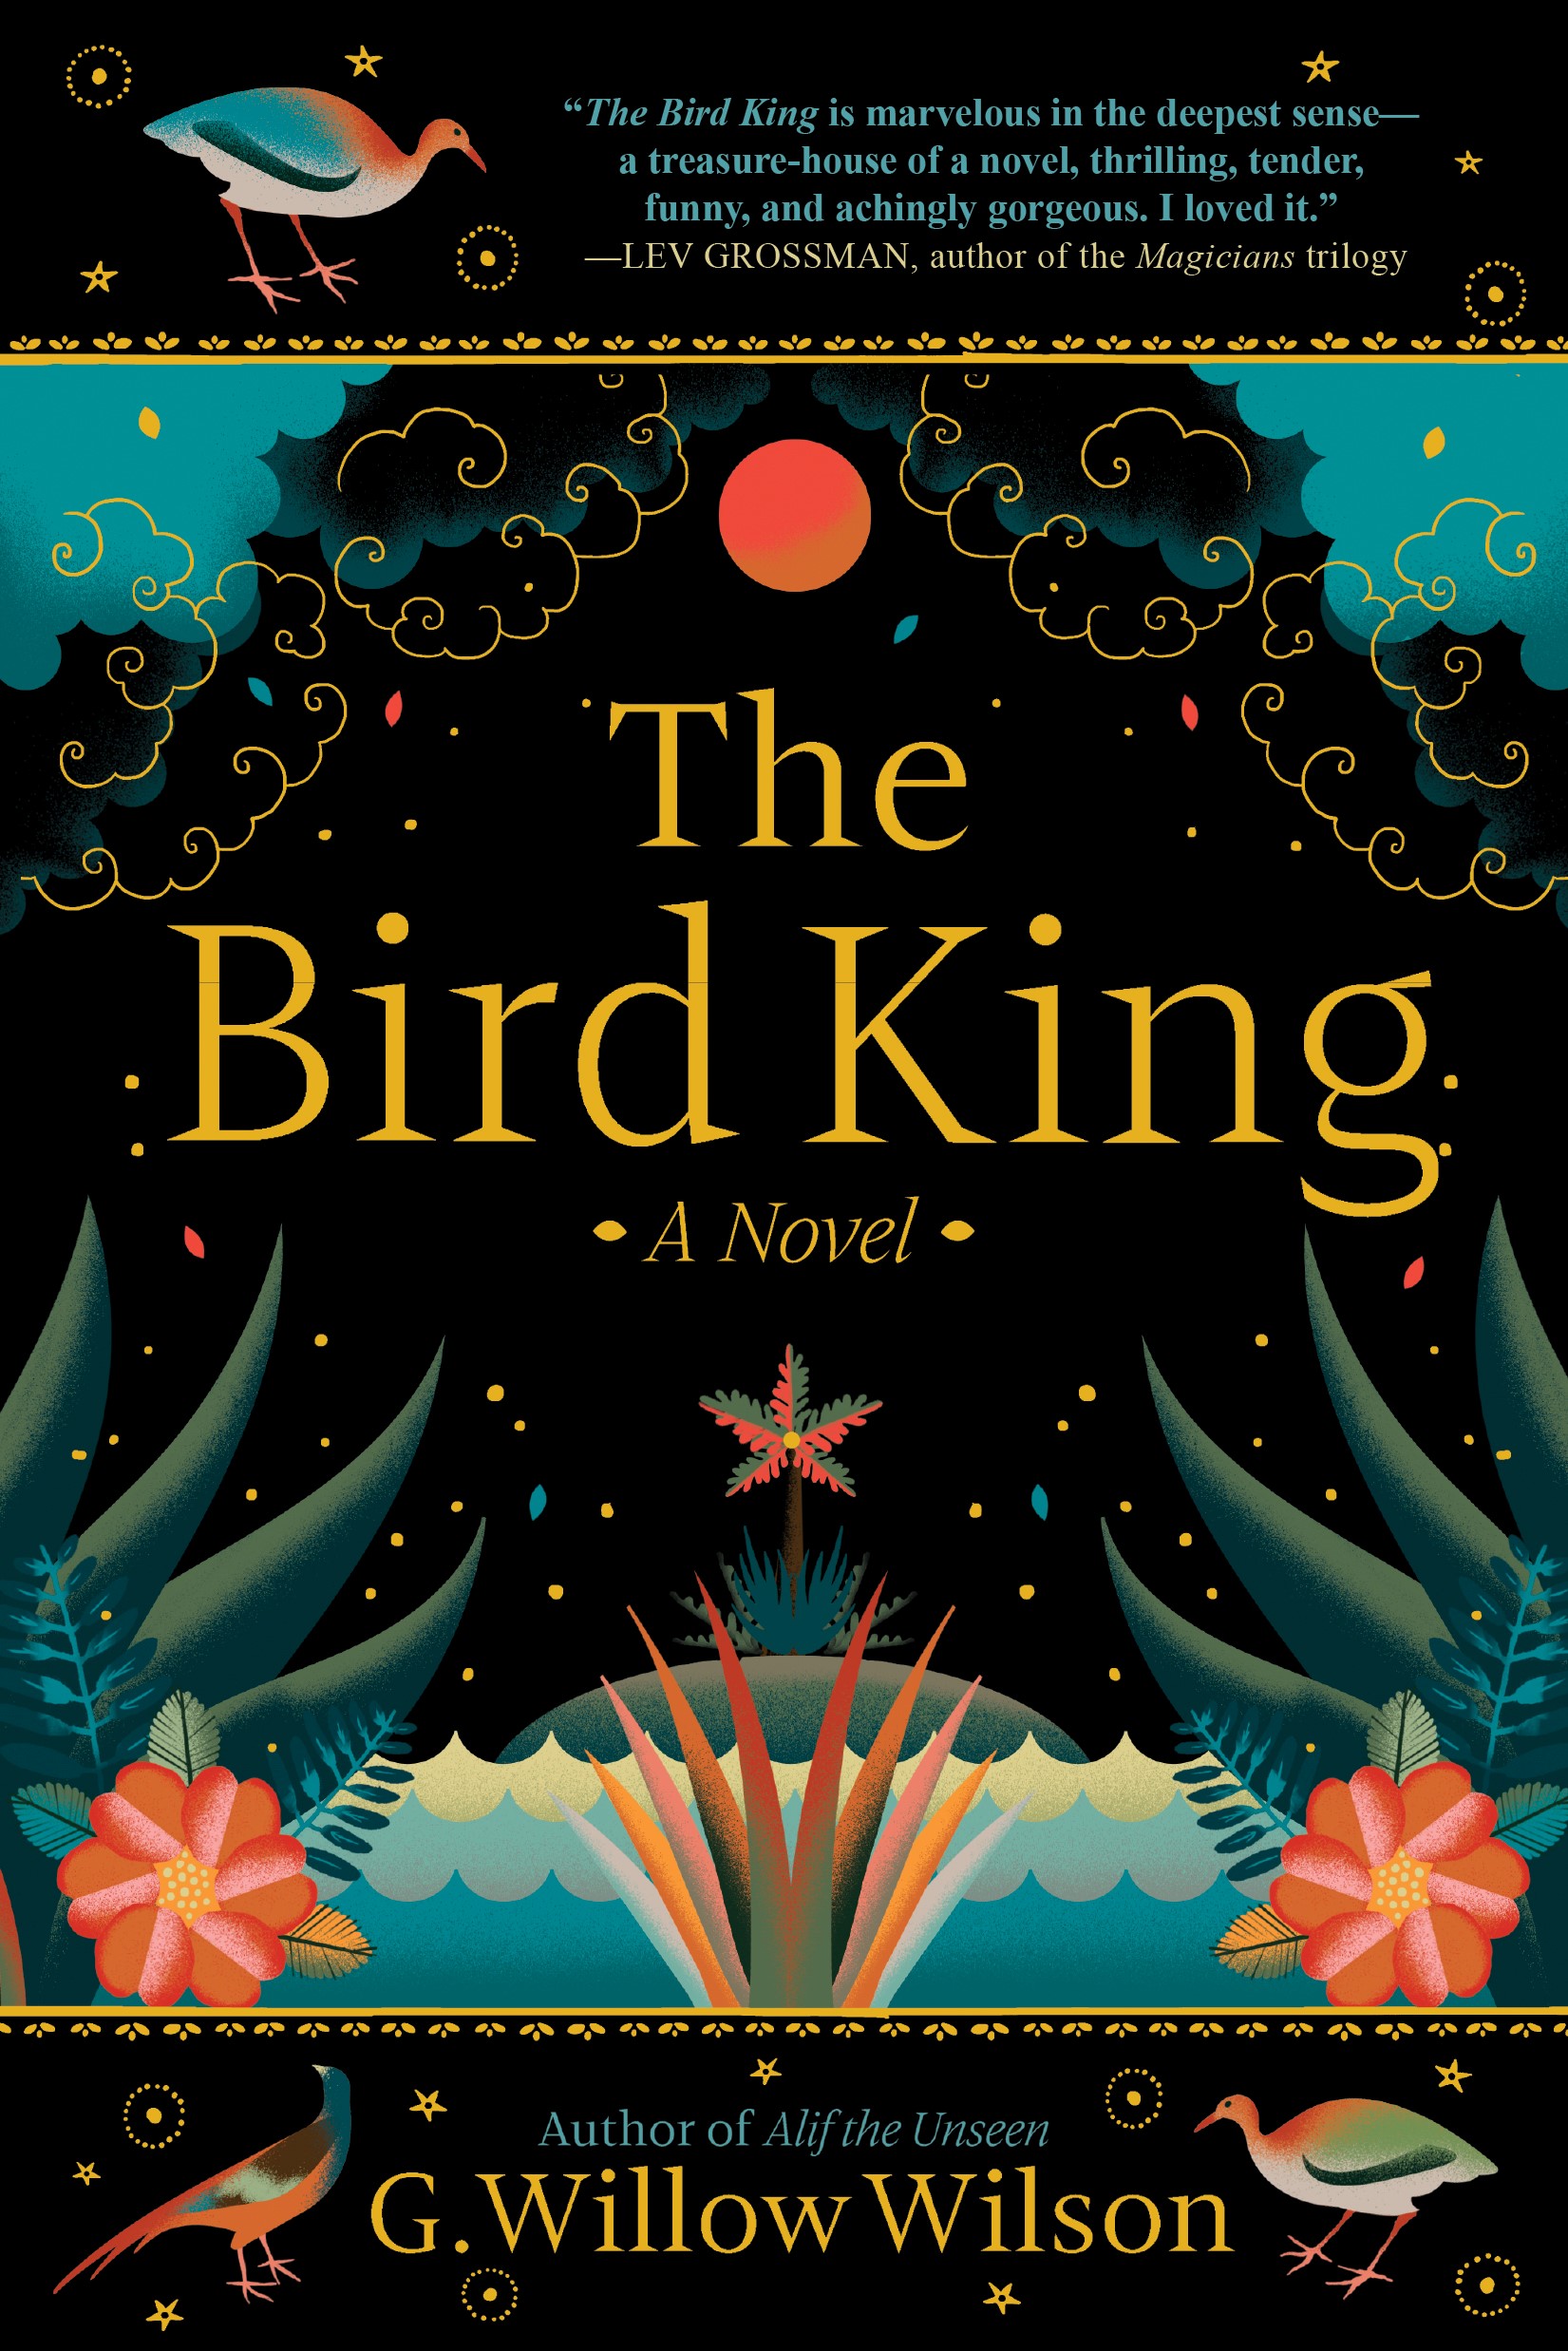 Image for "The Bird King"